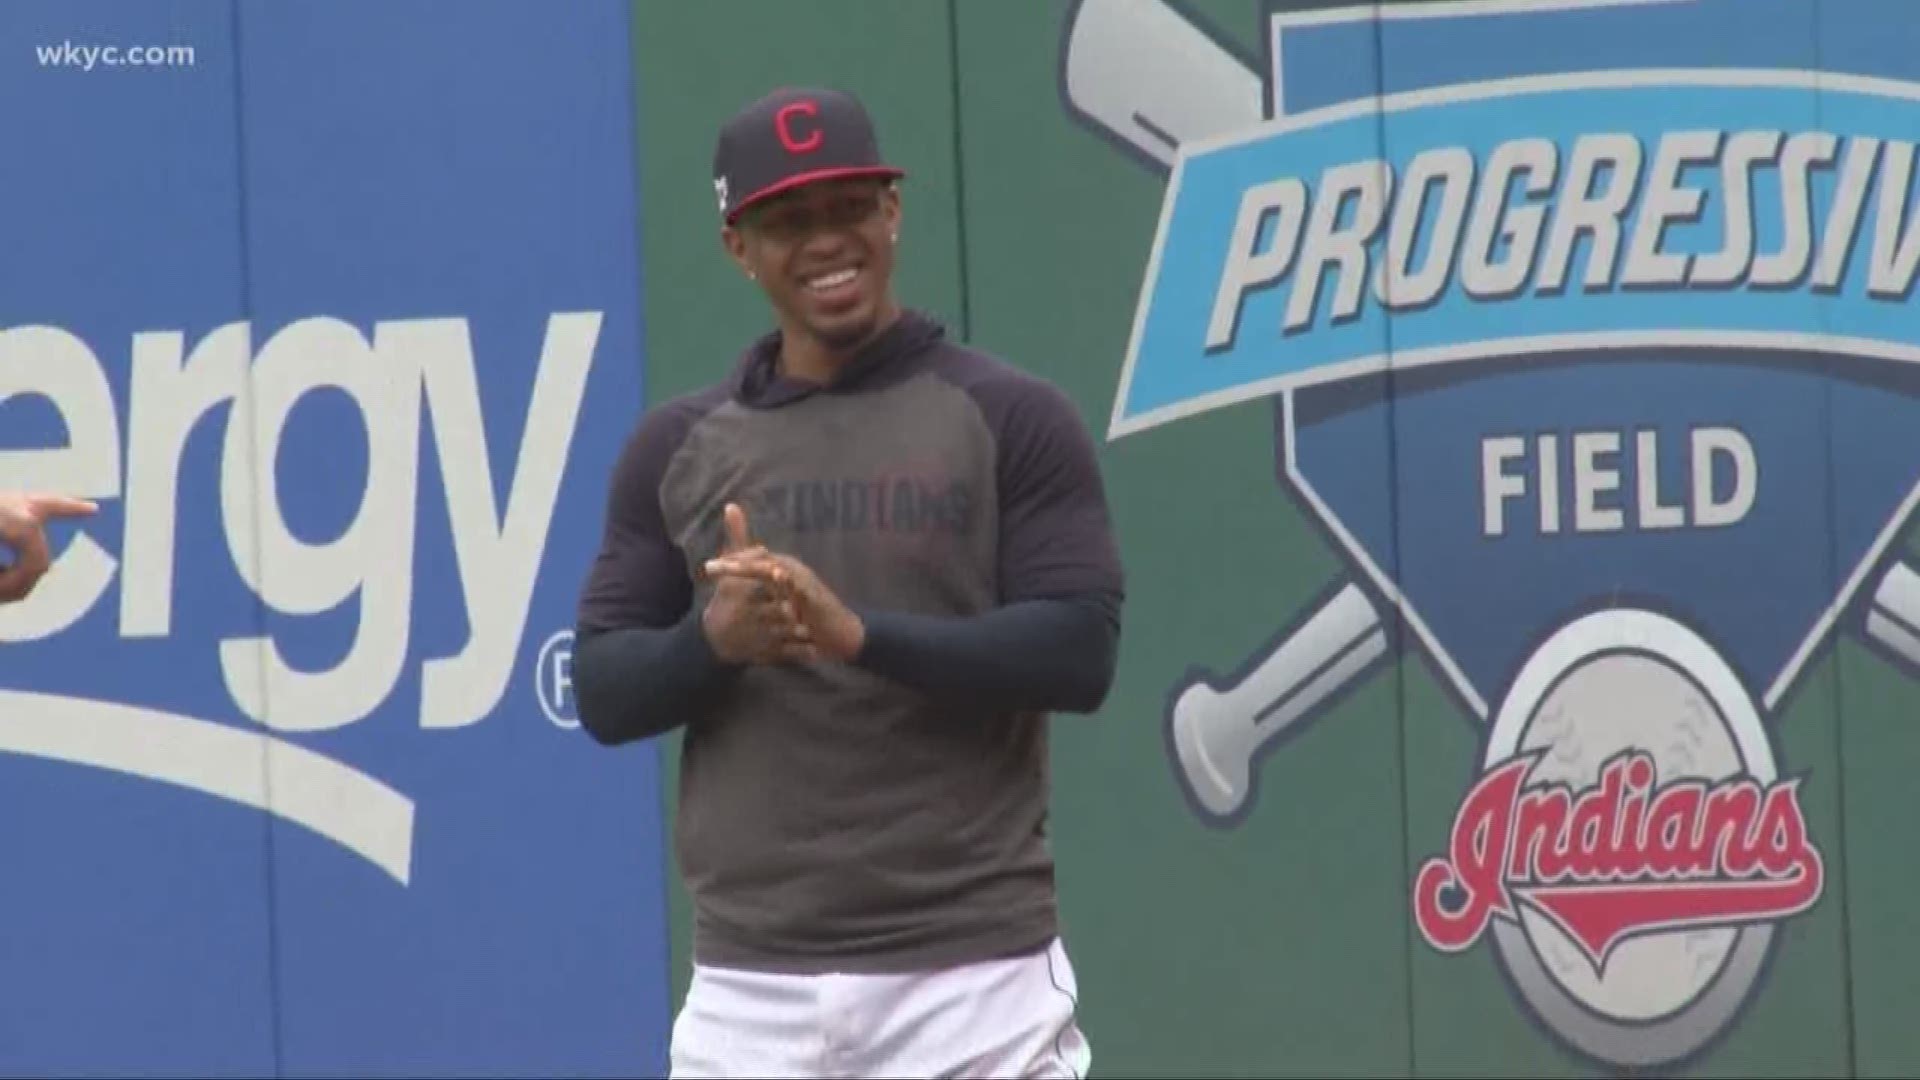 May 21, 2019: Major League Baseball has announced its lineup of special guests who will appear at PLAY BALL PARK as part of the 2019 MLB All-Star Game celebration this July in Cleveland. All-Star Ambassadors Francisco Lindor, Jim Thome, and Sandy Alomar Jr. will be among the current and former Indians, MLB Hall of Famers, and Olympic Gold medalists who will make appearances, sign autographs, and pose for photos with fans from July 5-9 at the Huntington Convention Center.